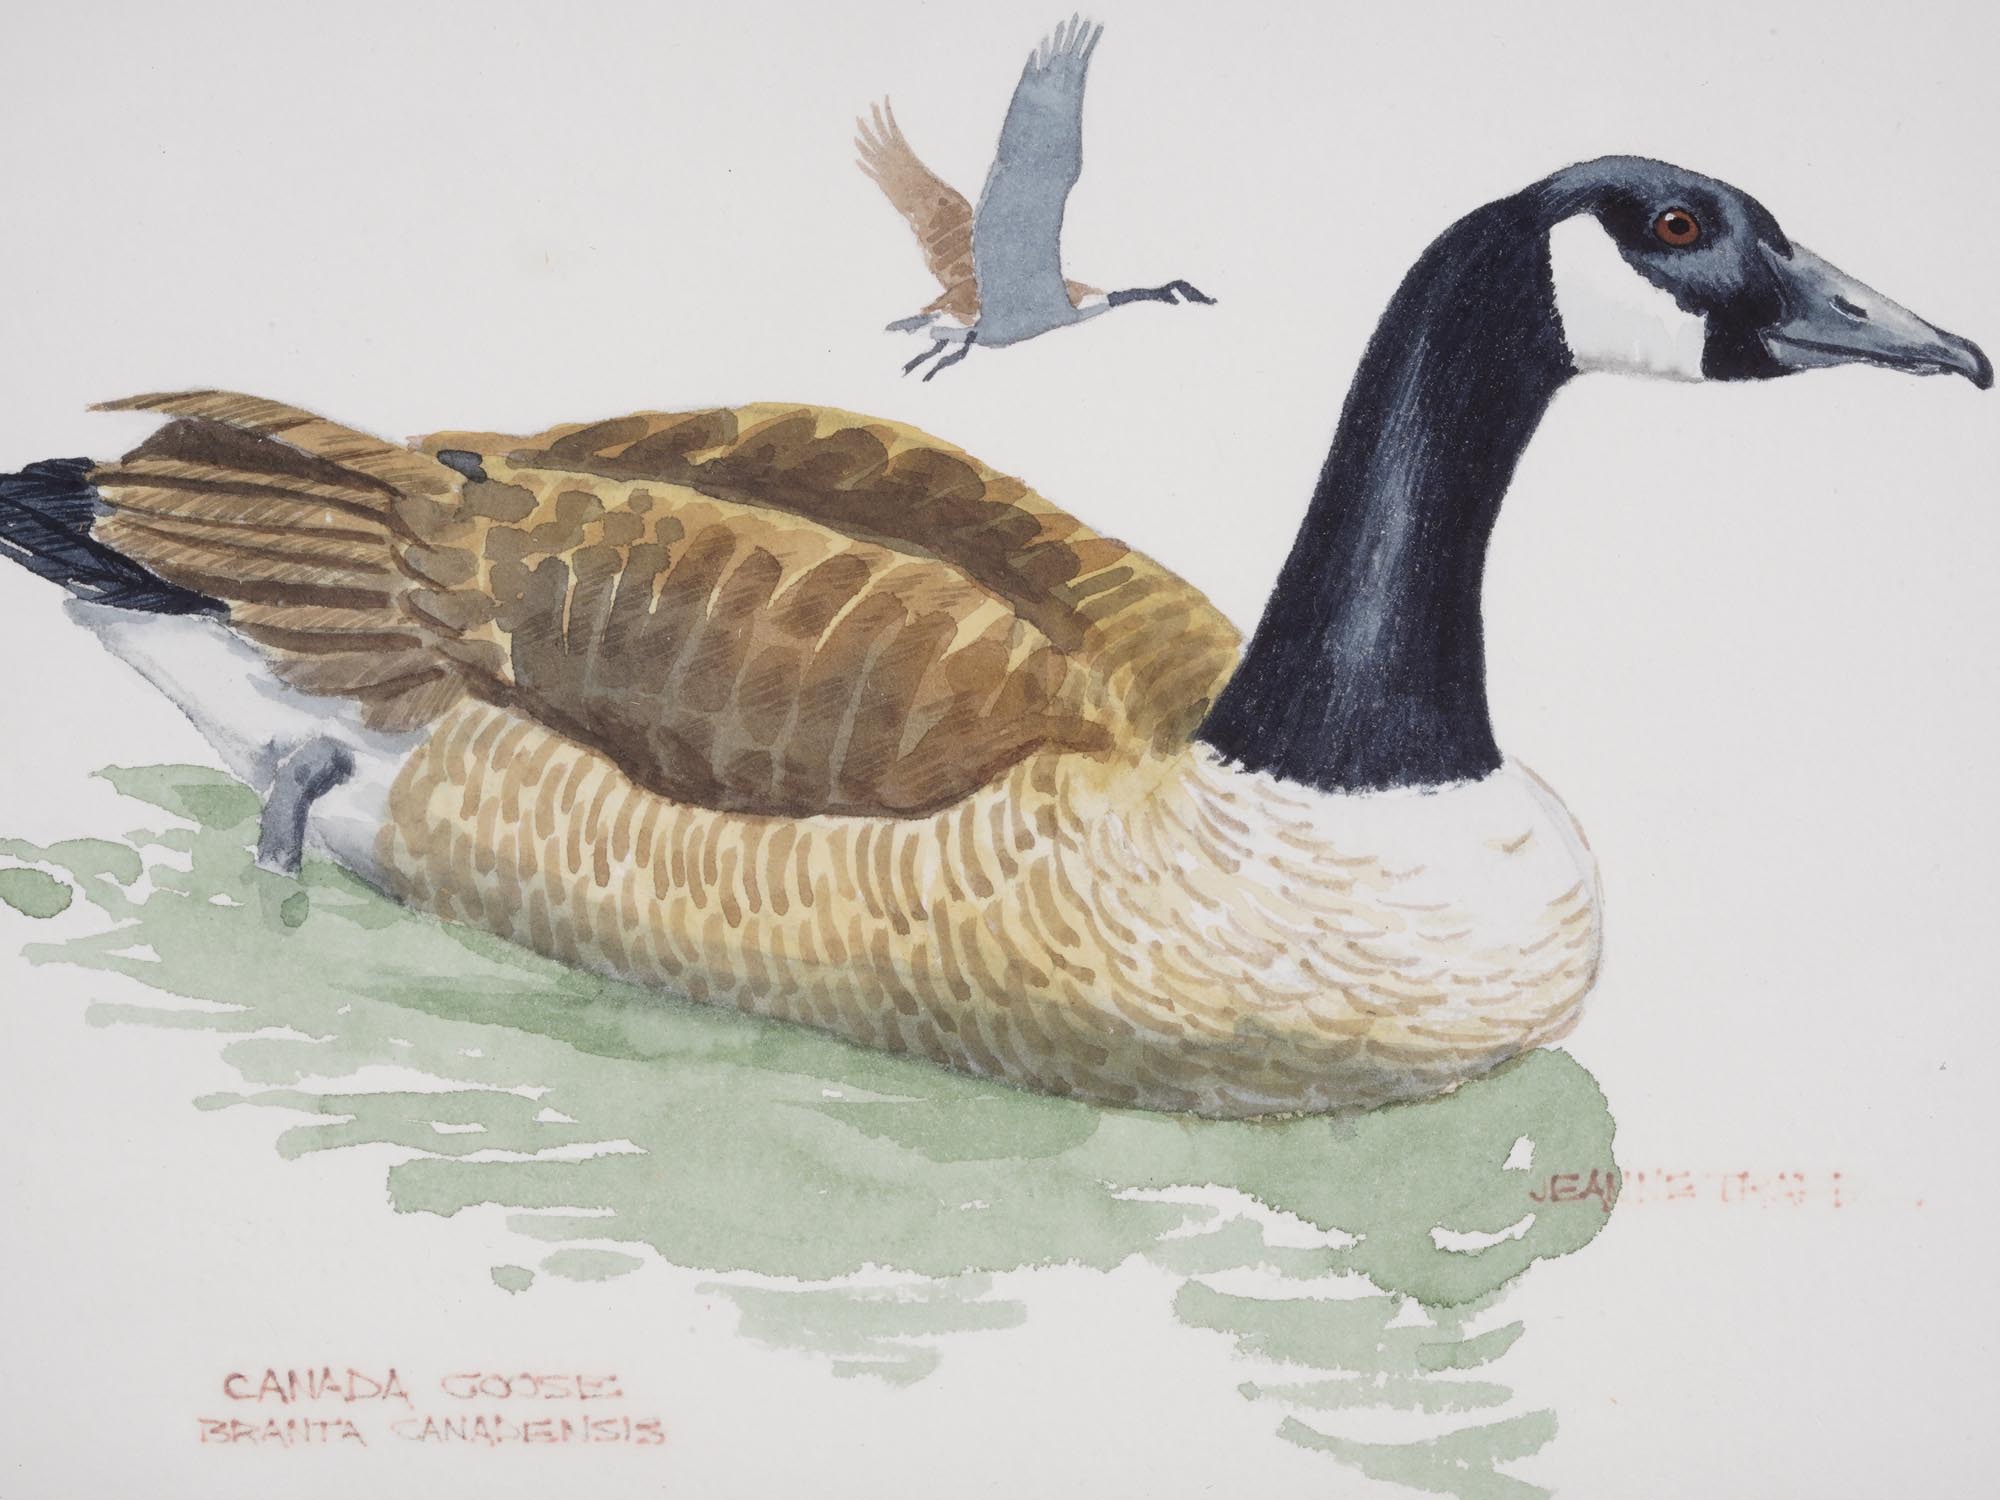 WATERCOLOR PAINTING OF A GOOSE BY JEANNE TRAPP PIC-1